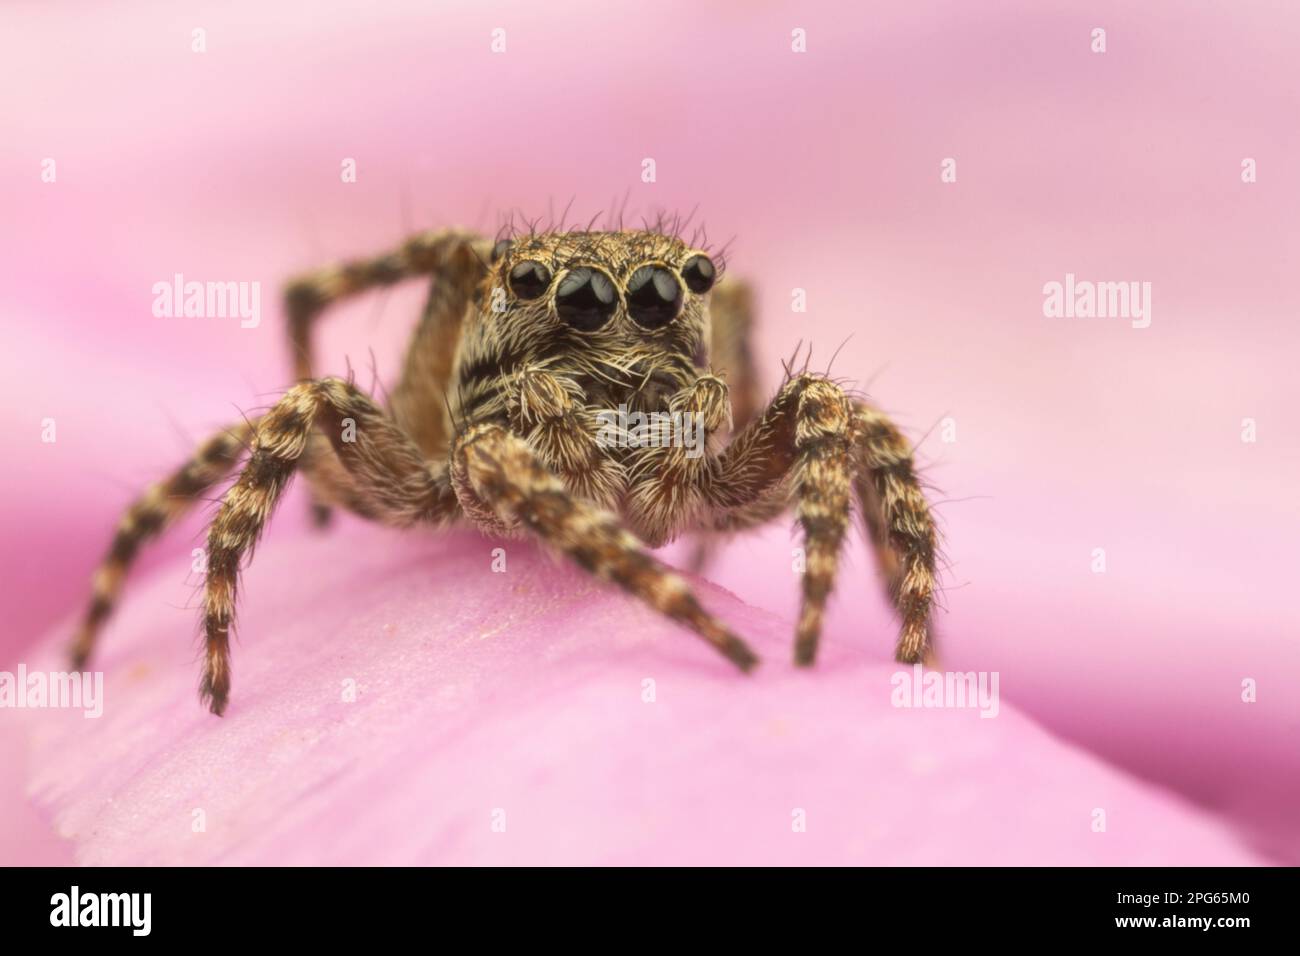 Fencepost Jumping Spider (Sitticus pubescens) adult, resting on pink flower, Leicestershire, England, United Kingdom Stock Photo